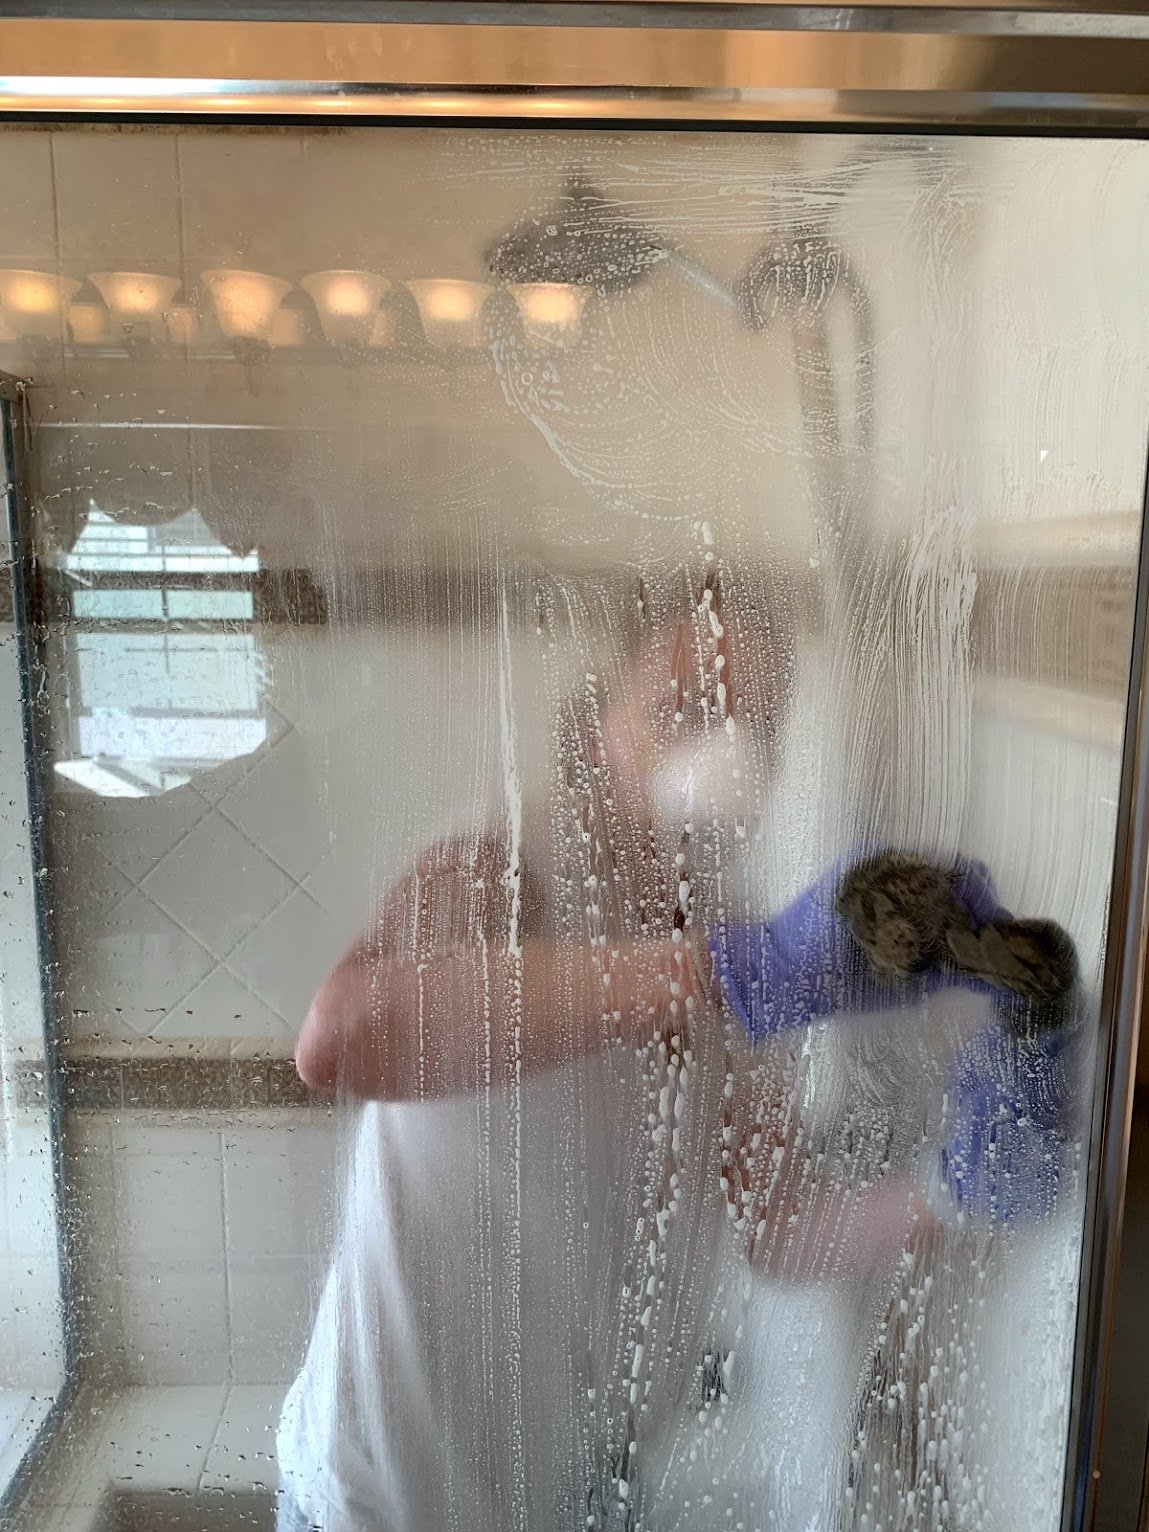 bar keepers friend being applied to shower door covered in hard water stains